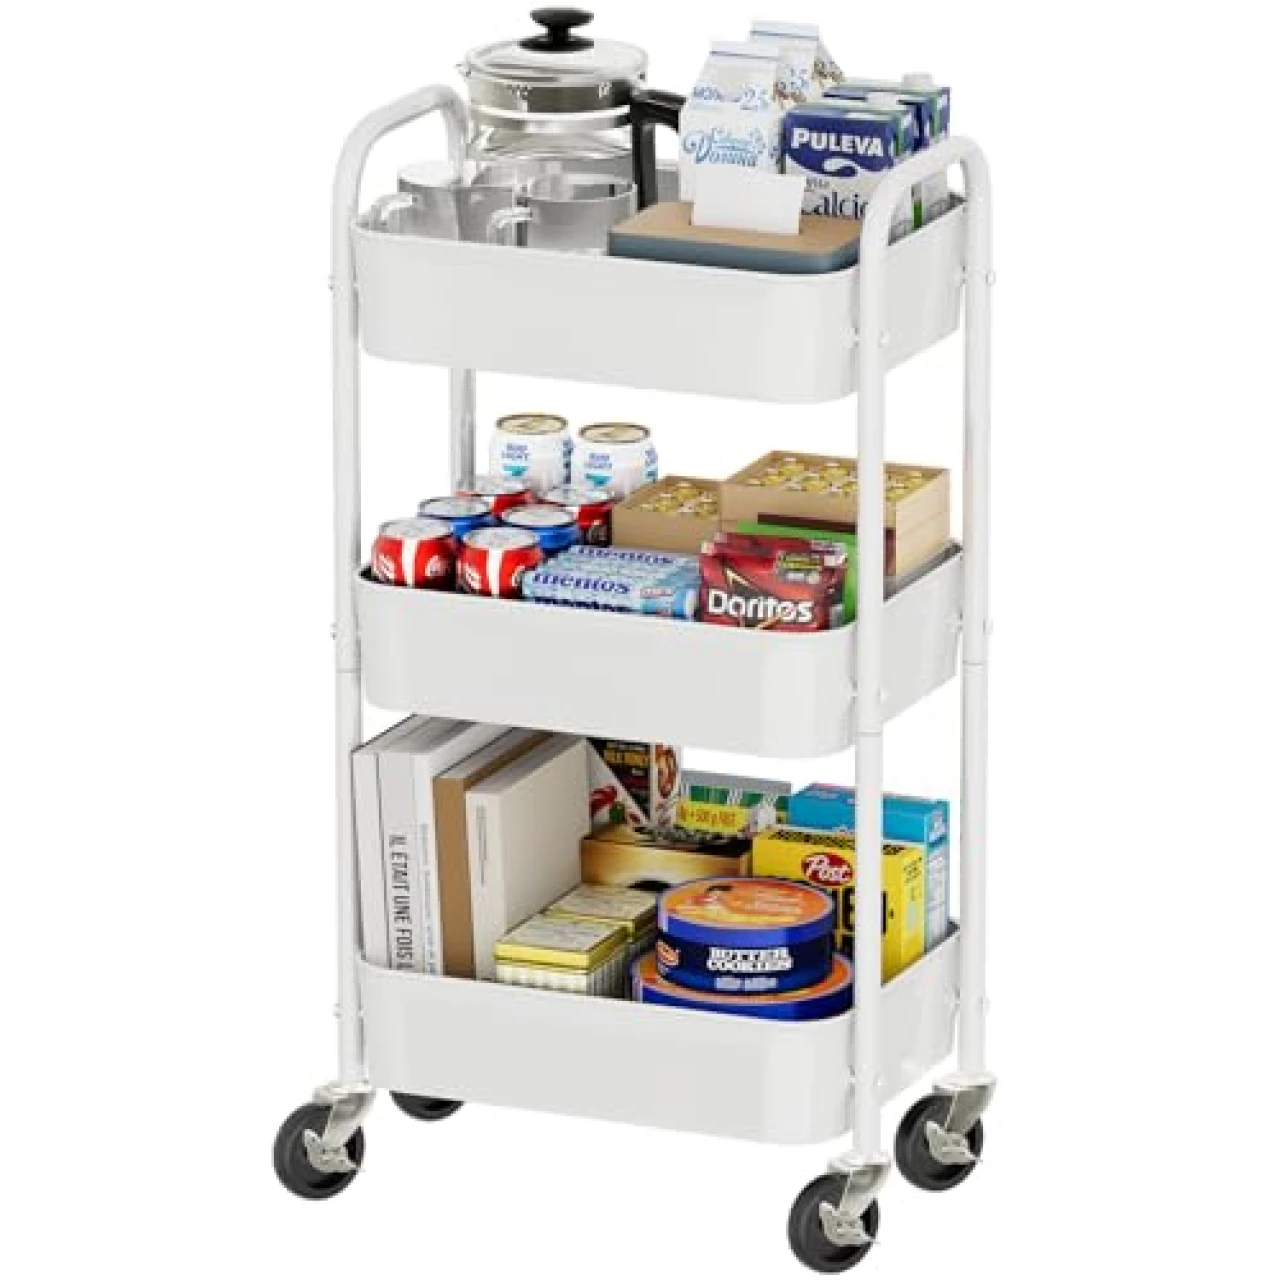 Simple Trending 3 Tier Metal Cart on Wheels, Heavy Duty Rolling Storage Cart for Kitchen to Organize Books Snacks Tools, White